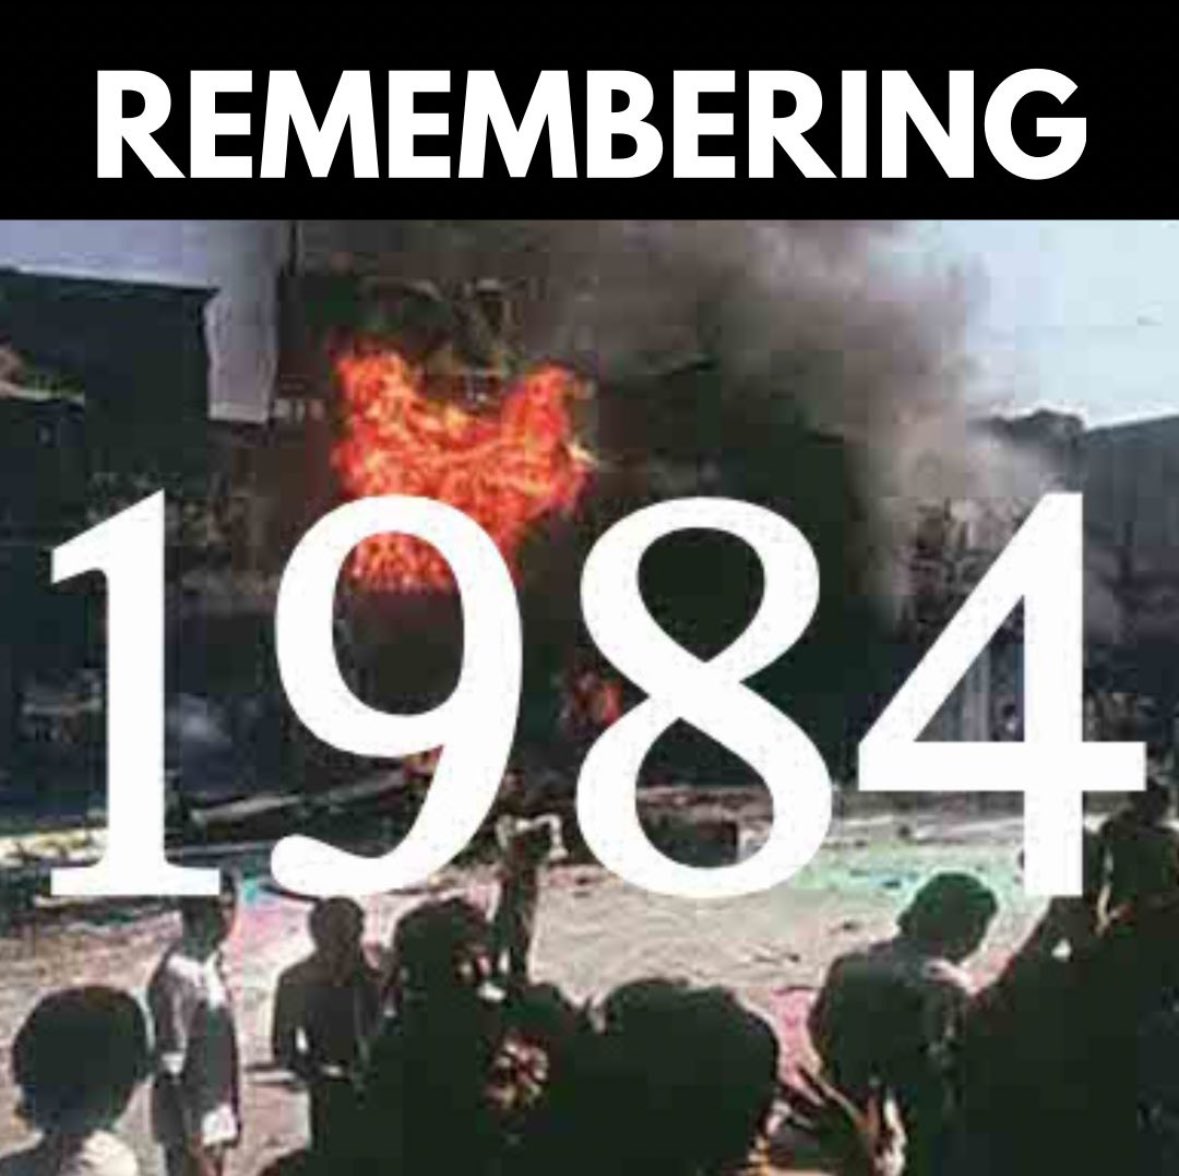 #SikhGenocide 40yrs ago on June 1st the Harmandir Sahib in Amritsar was attacked by the Indian Government, it led to the killing of thousands of Sikhs around India. I was in India in 1984. I was 11. My knowledge was limited but the damage around was visible. Still no justice.